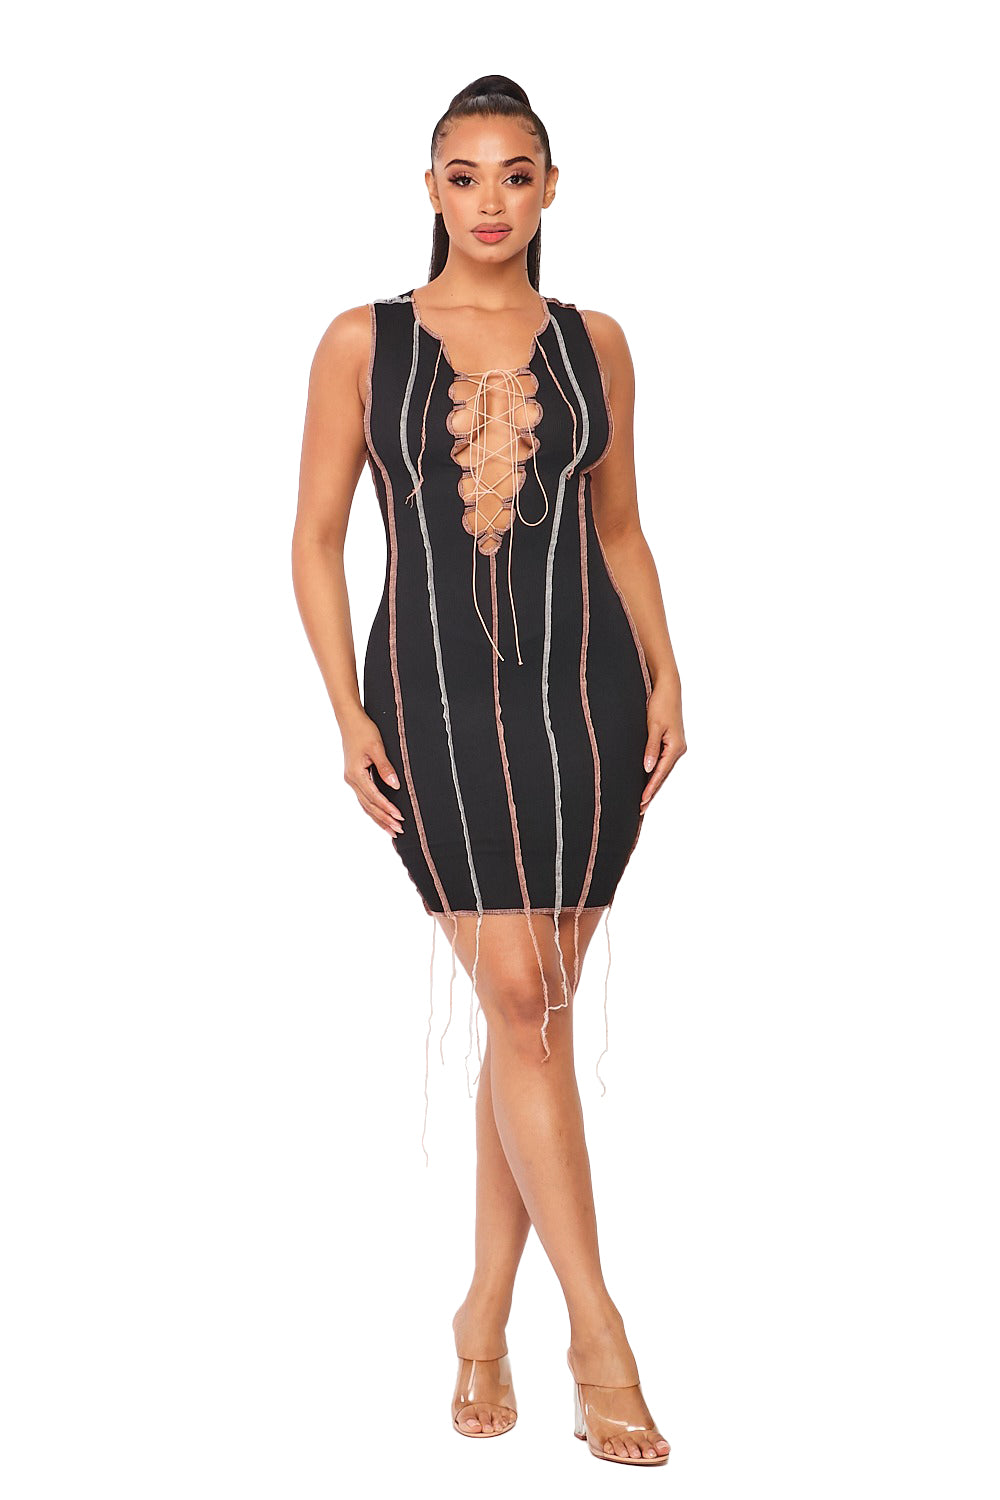 Laced Up Tank Dress Hot & Delicious